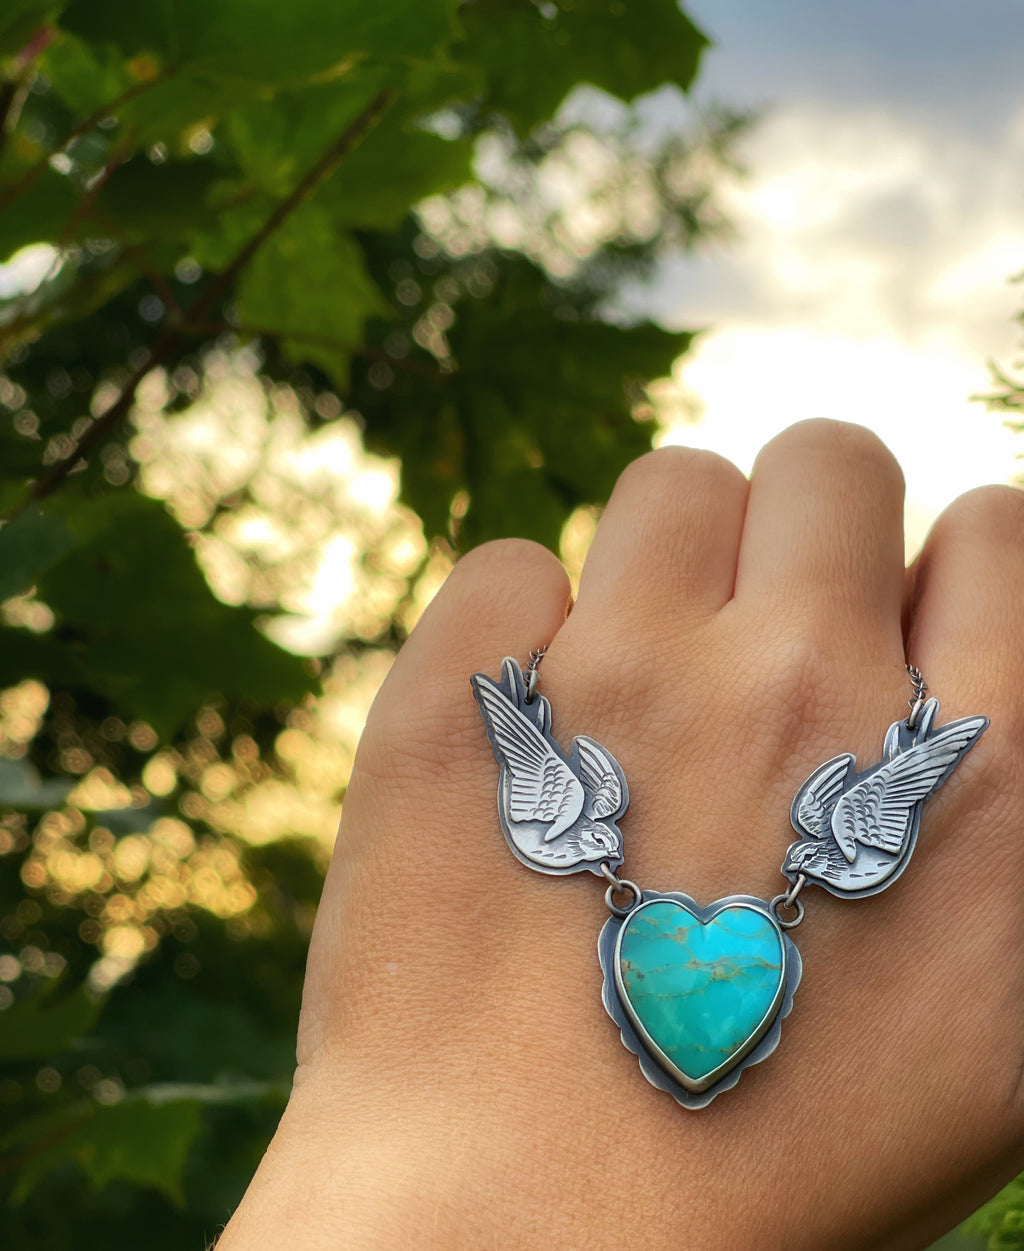 The Swallow & Turquoise Heart Necklace